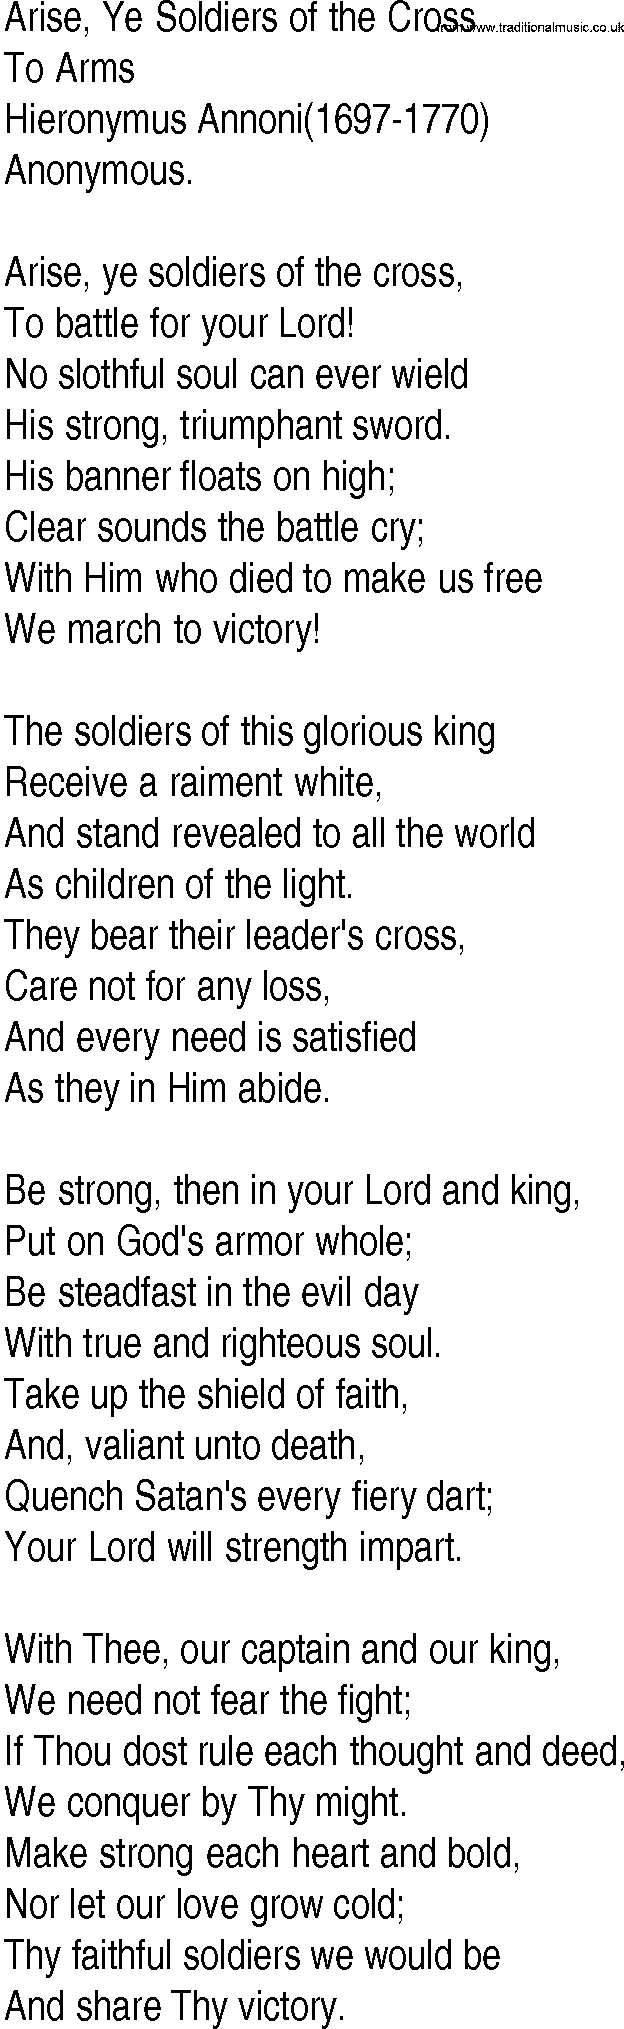 Hymn and Gospel Song: Arise, Ye Soldiers of the Cross by Hieronymus Annoni lyrics